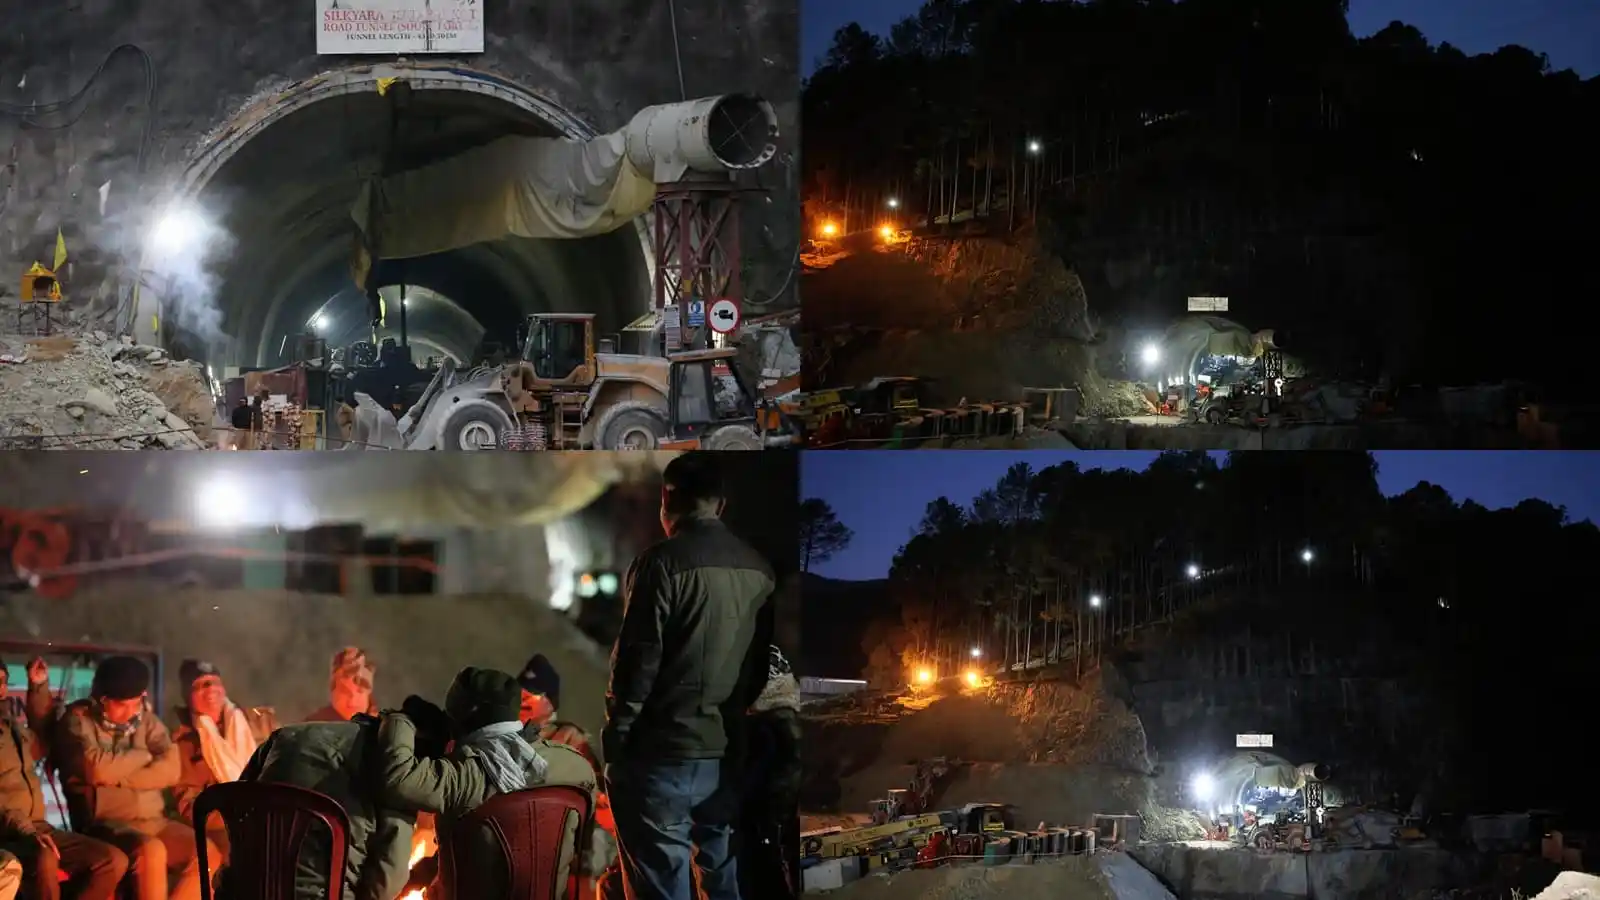 Uttarakhand tunnel collapse Tunnel rescue mission